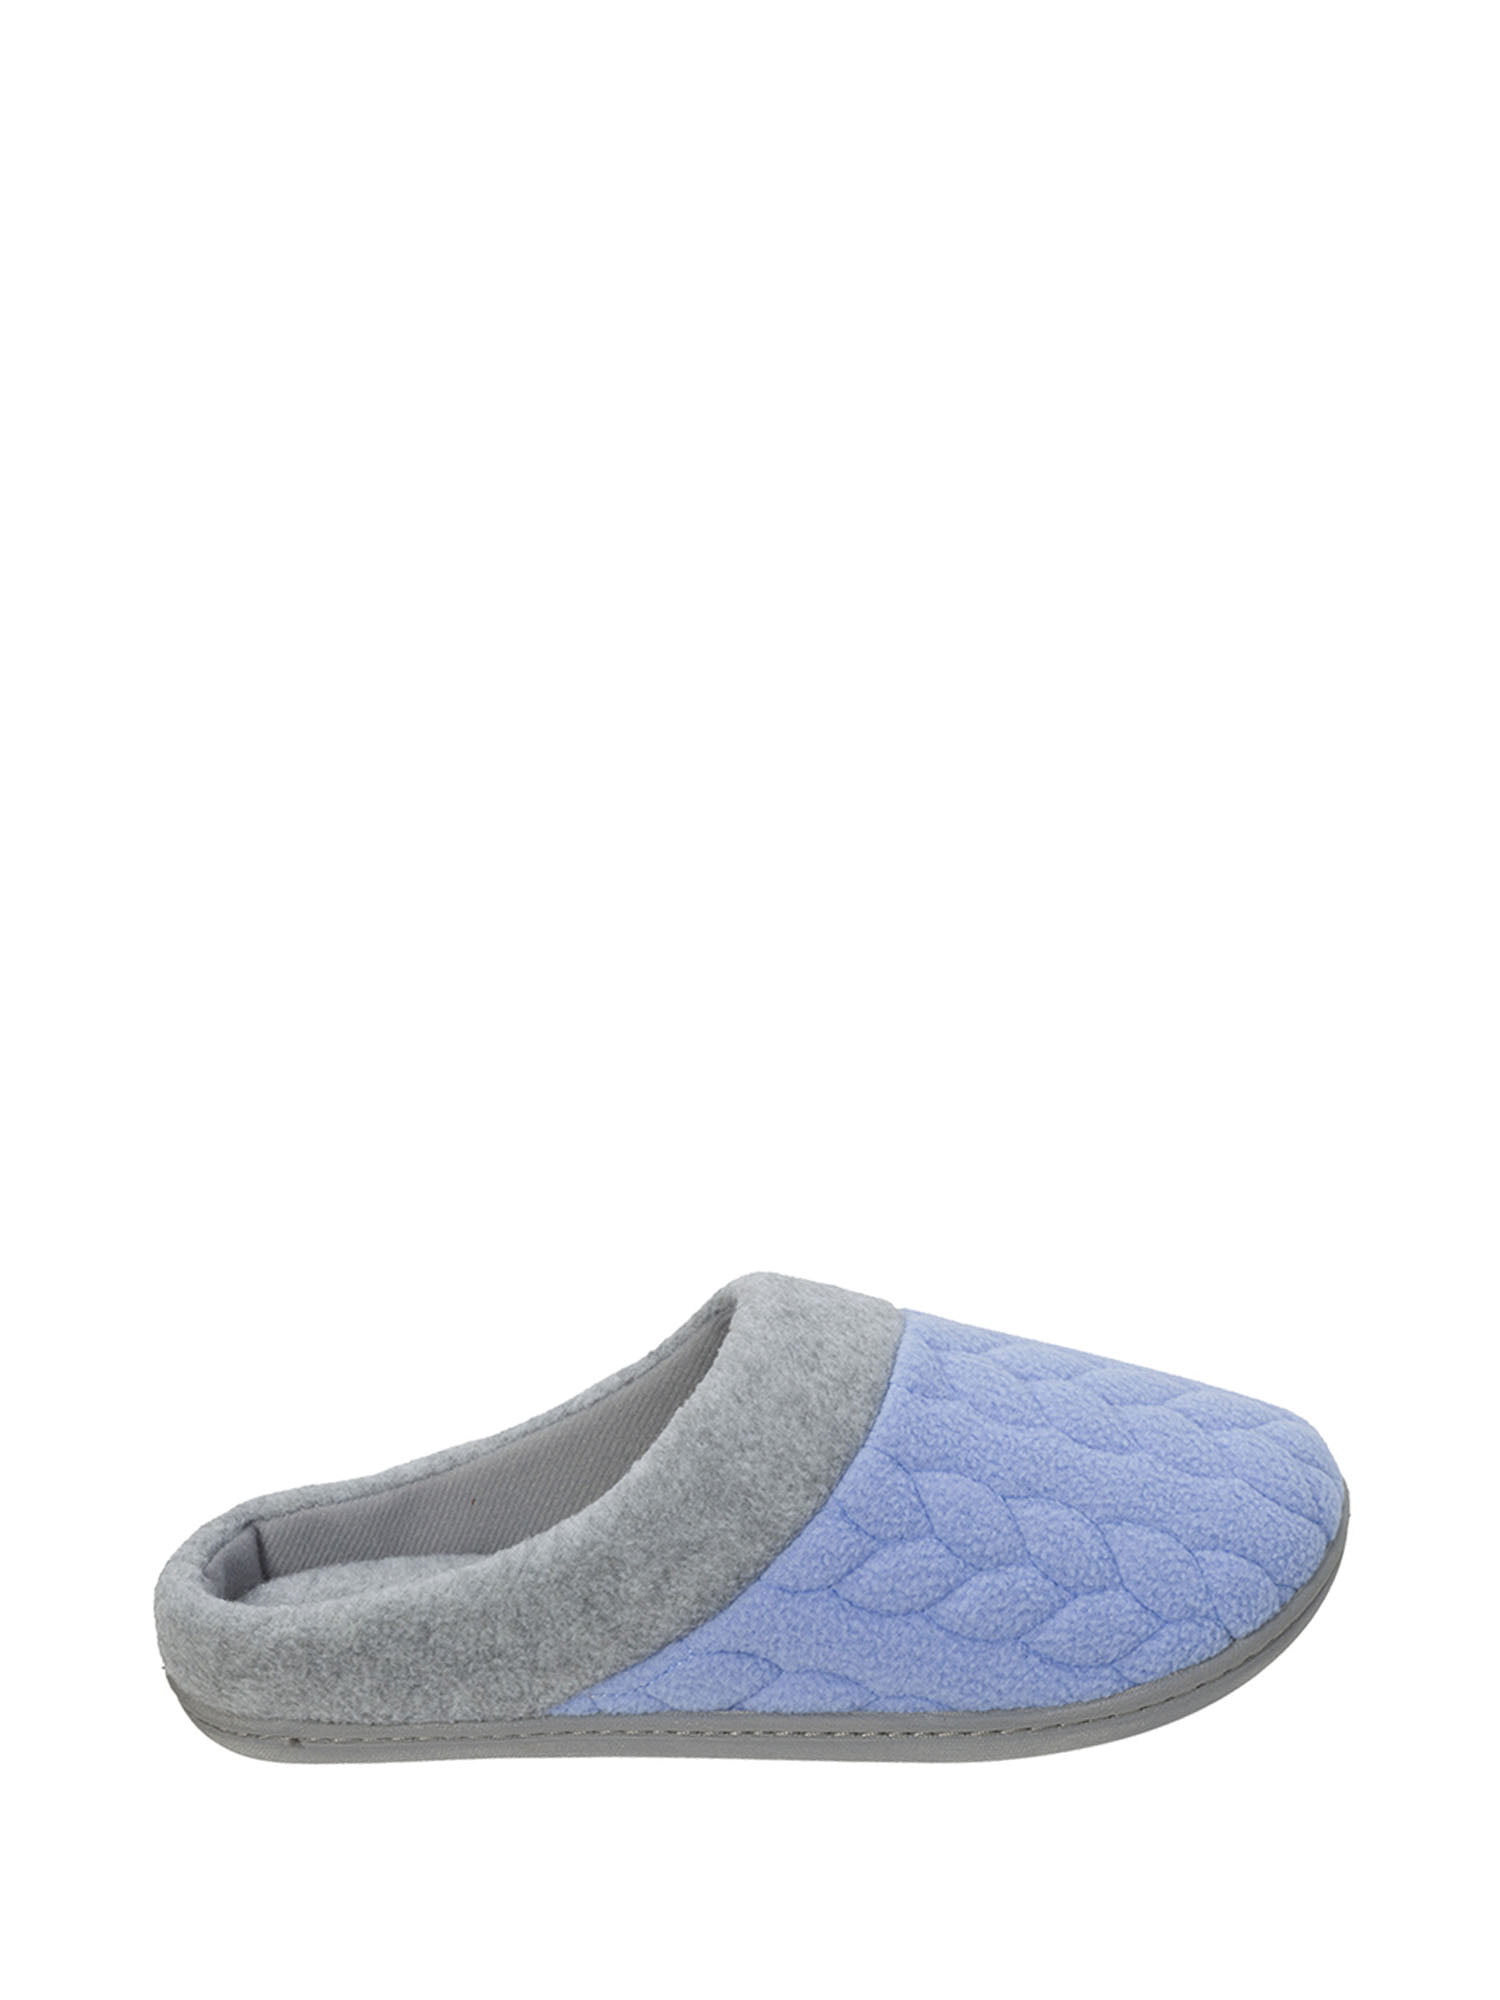 dearfoam quilted slippers